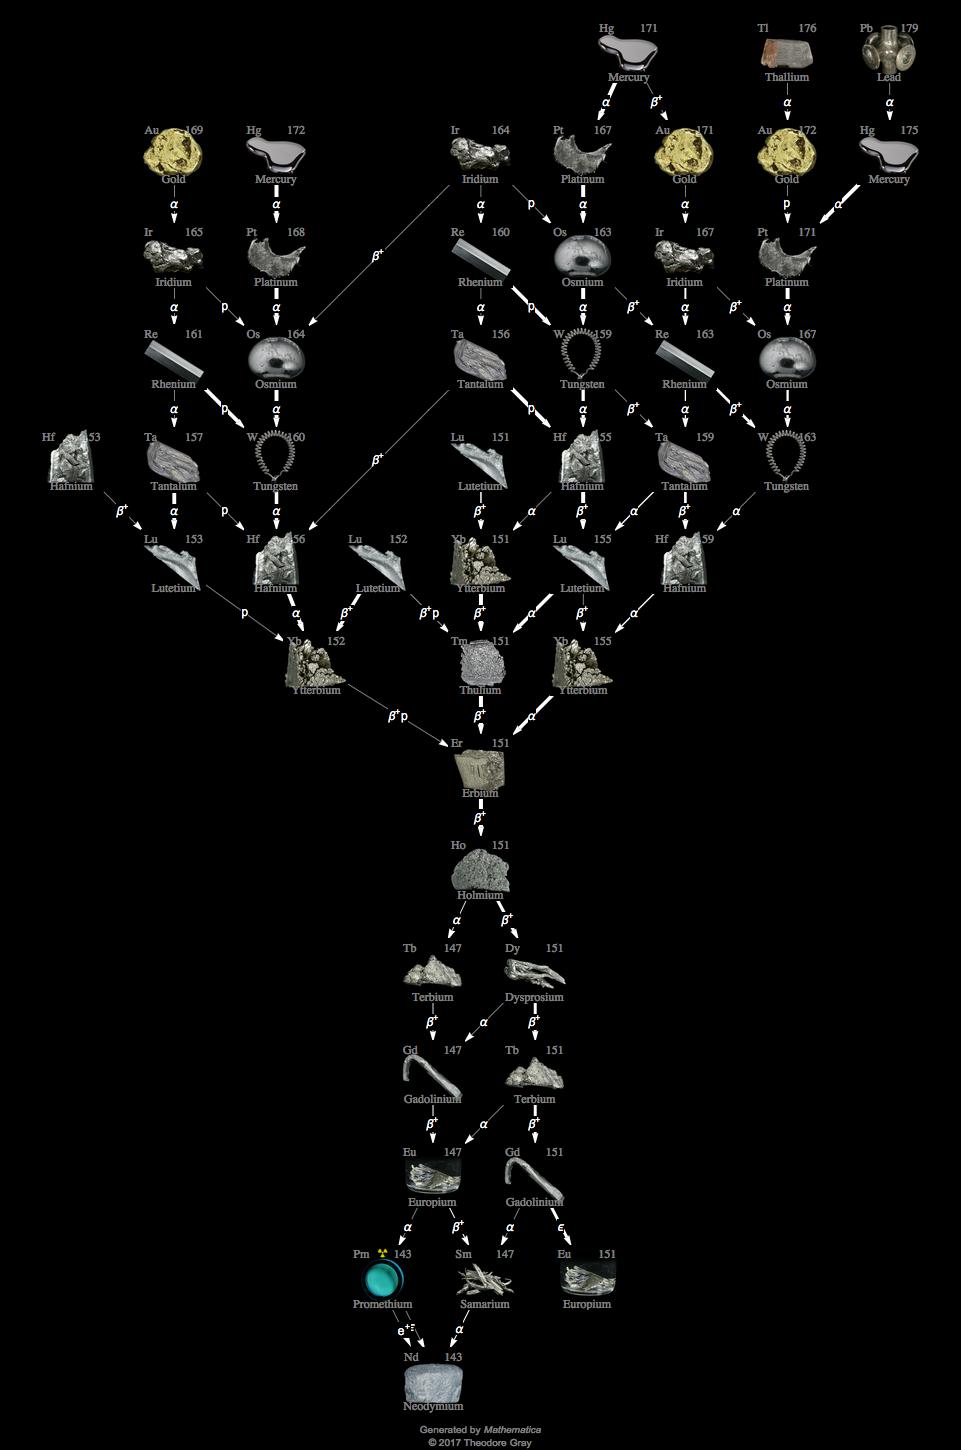 Decay Chain Image